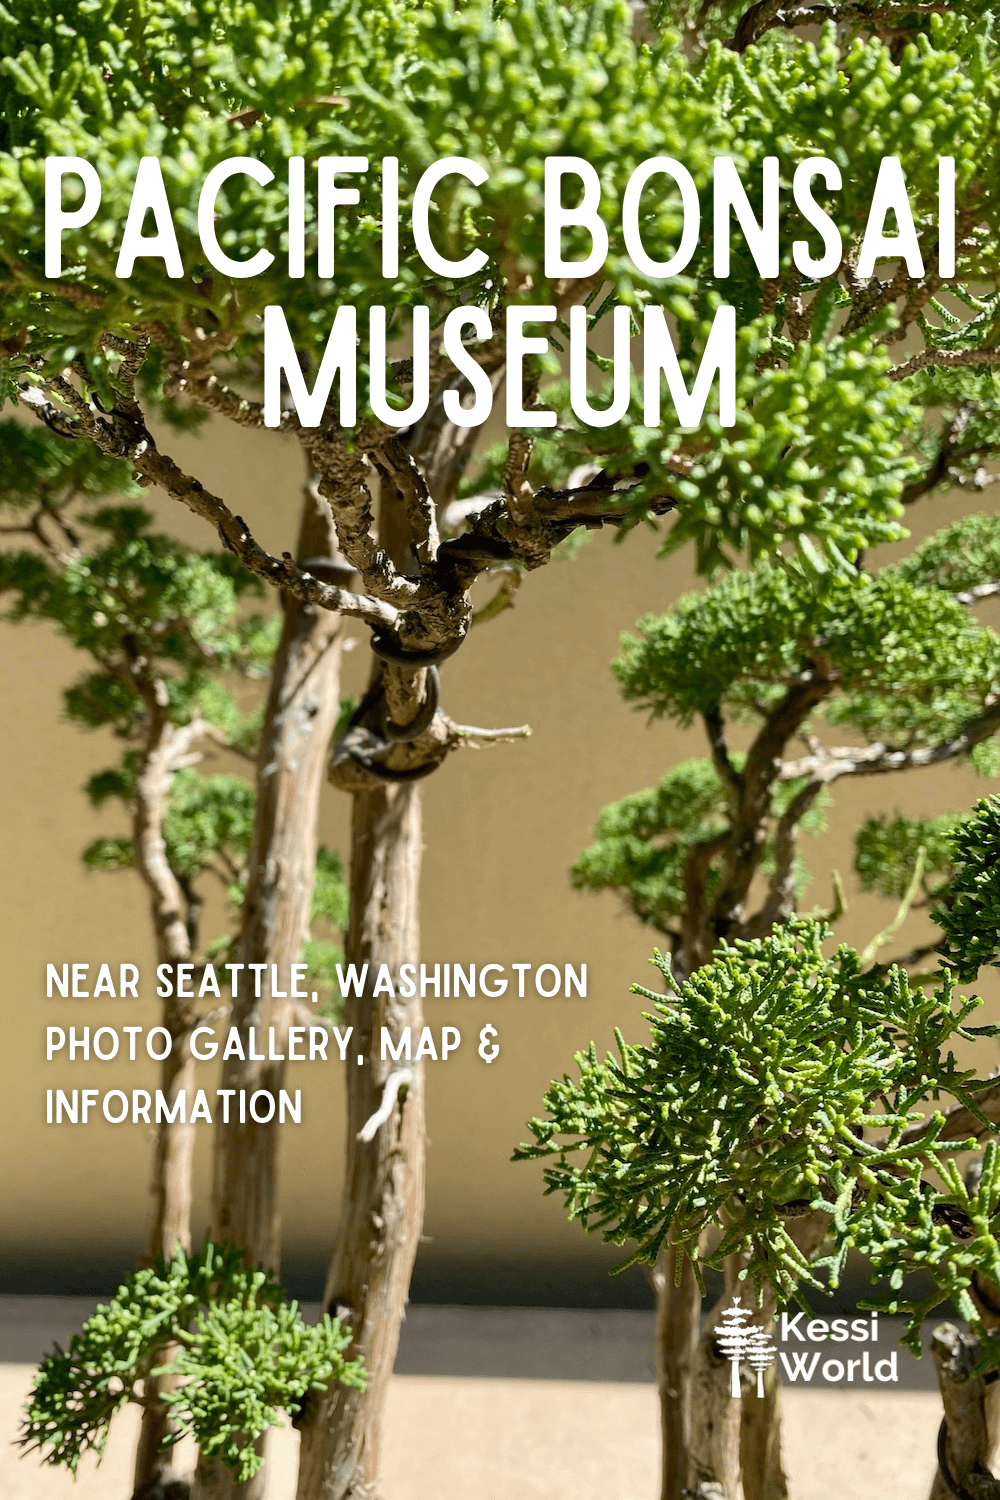 This Pinterest pin shows a close up shot of a beautifully crafted Bonsai miniature tree from the Pacific Bonsai Museum.  The gentle cedar leaves are a bright lime green against the wood colors of the trunk.  A shadow in the background creeps along the yellow wall.  